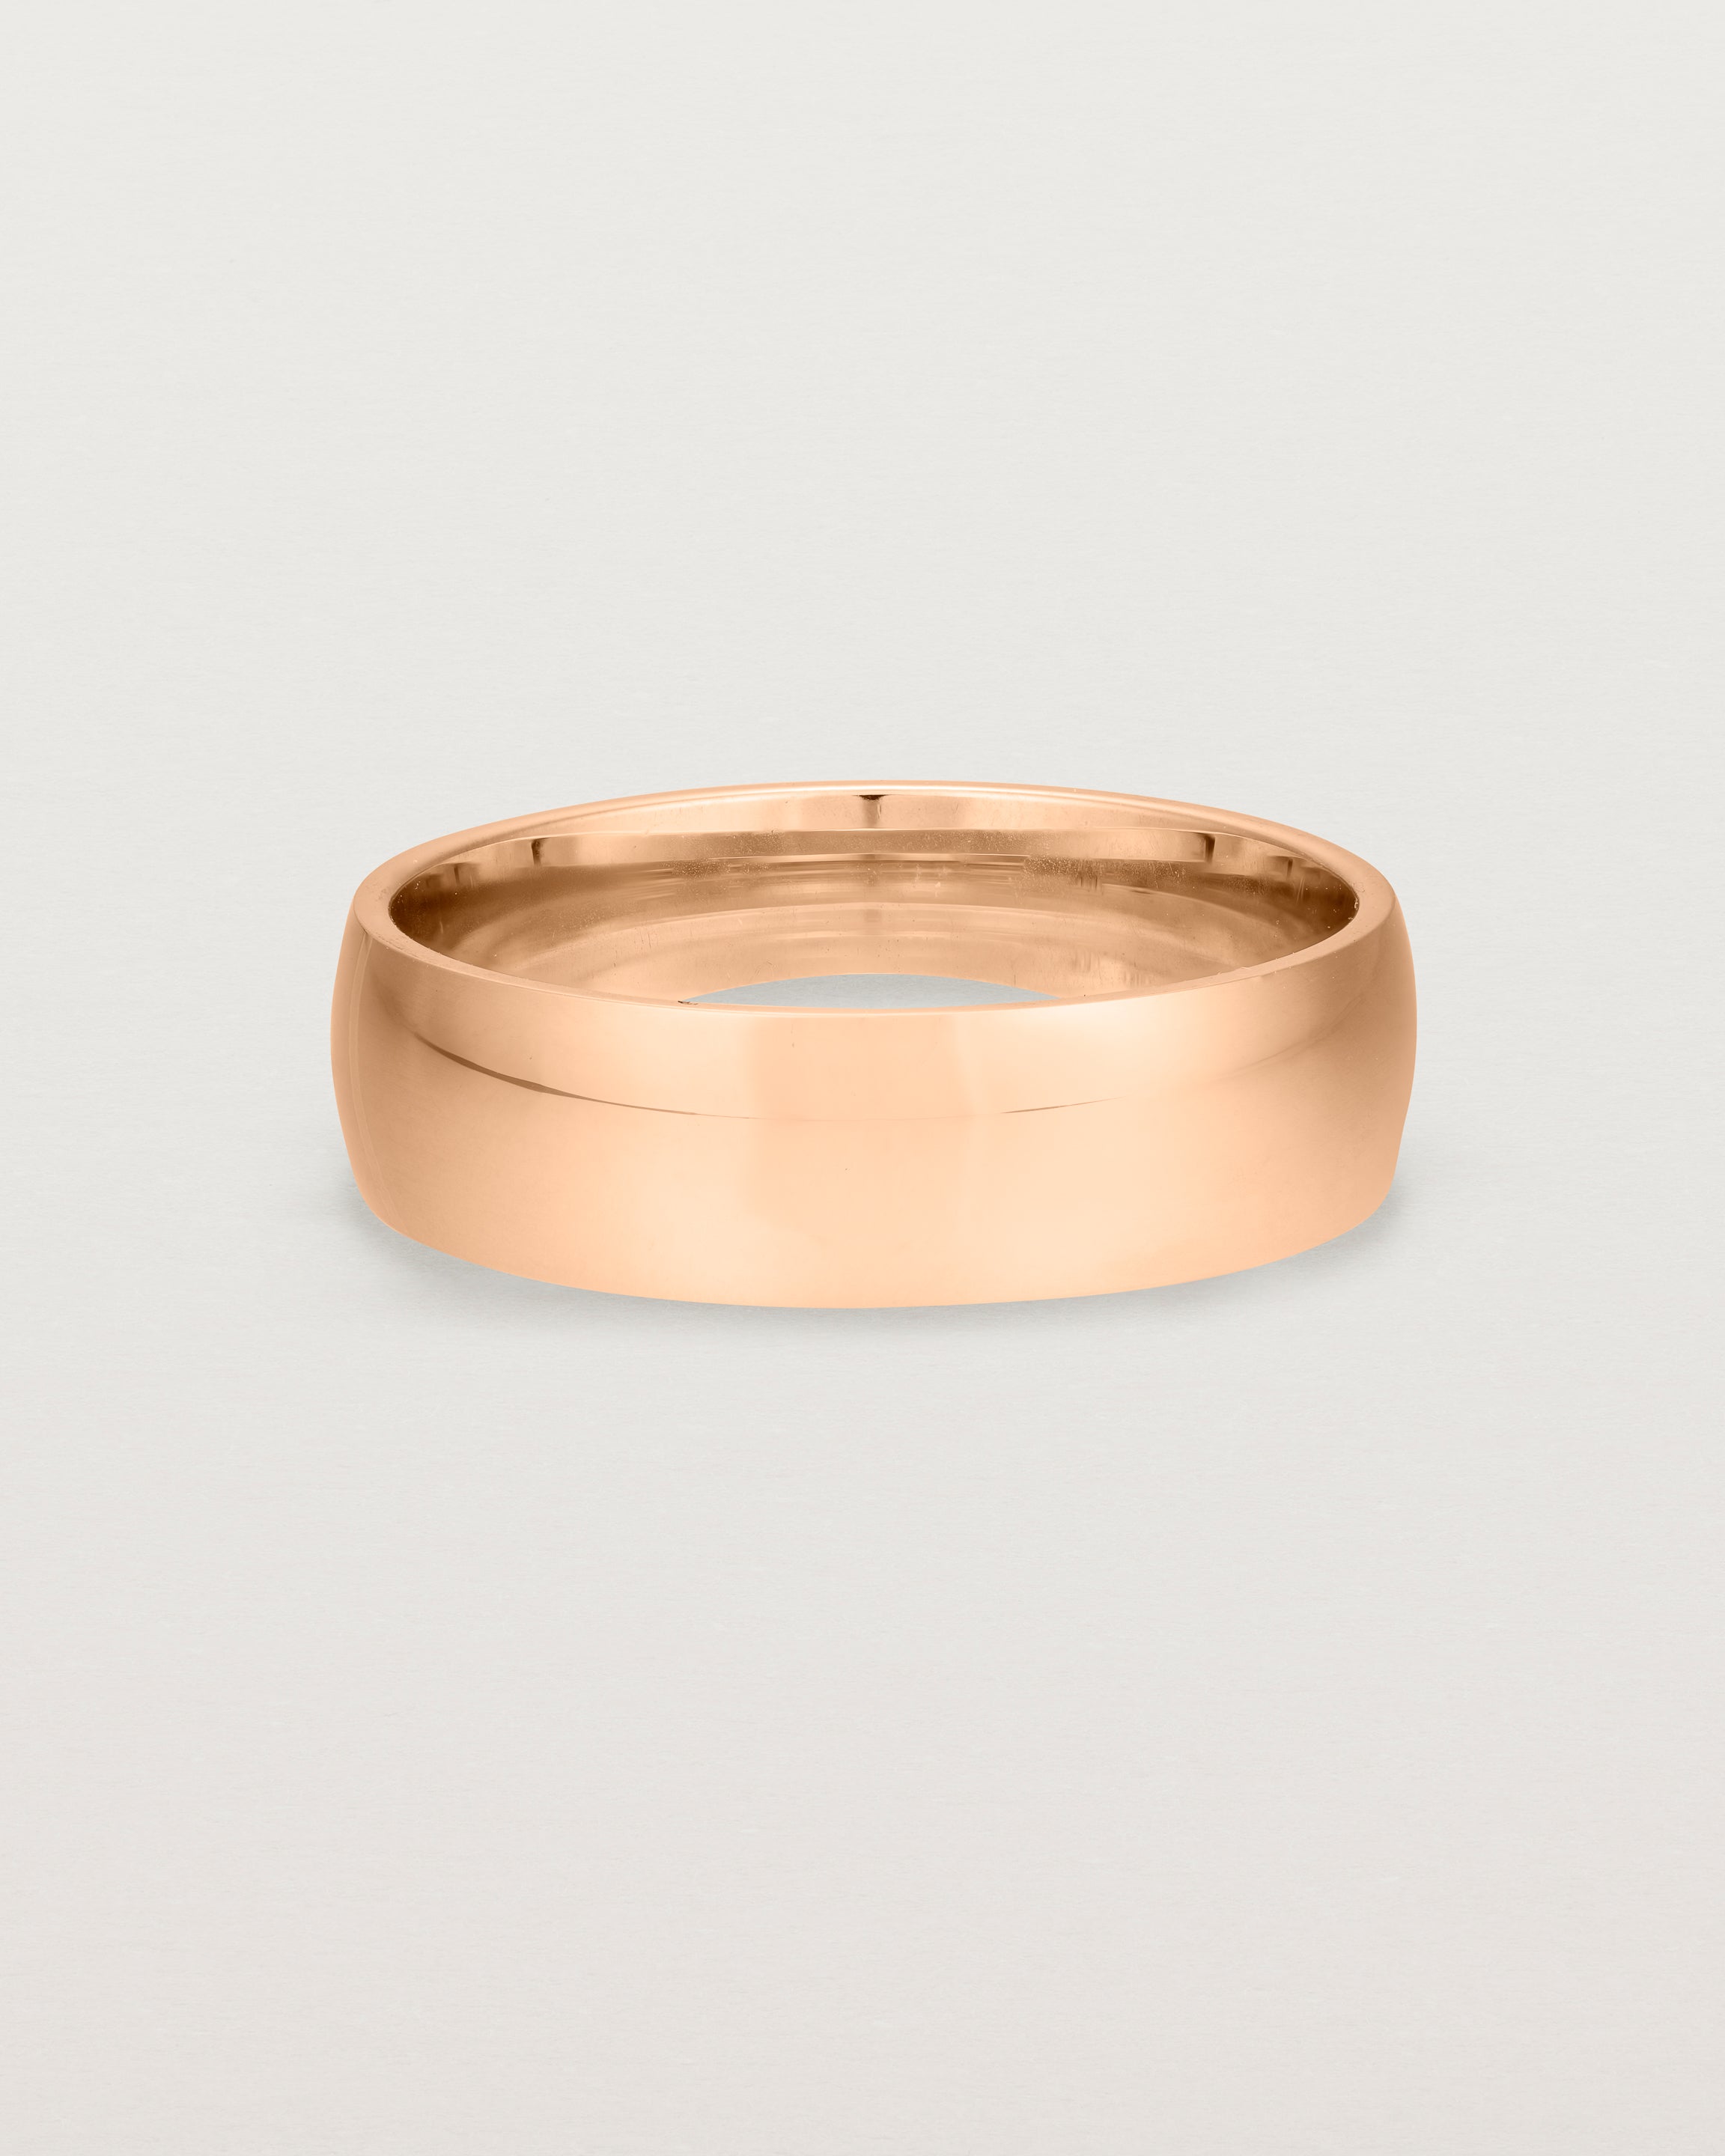 The front view of a 6mm wide heavy wedding ring in rose gold. 